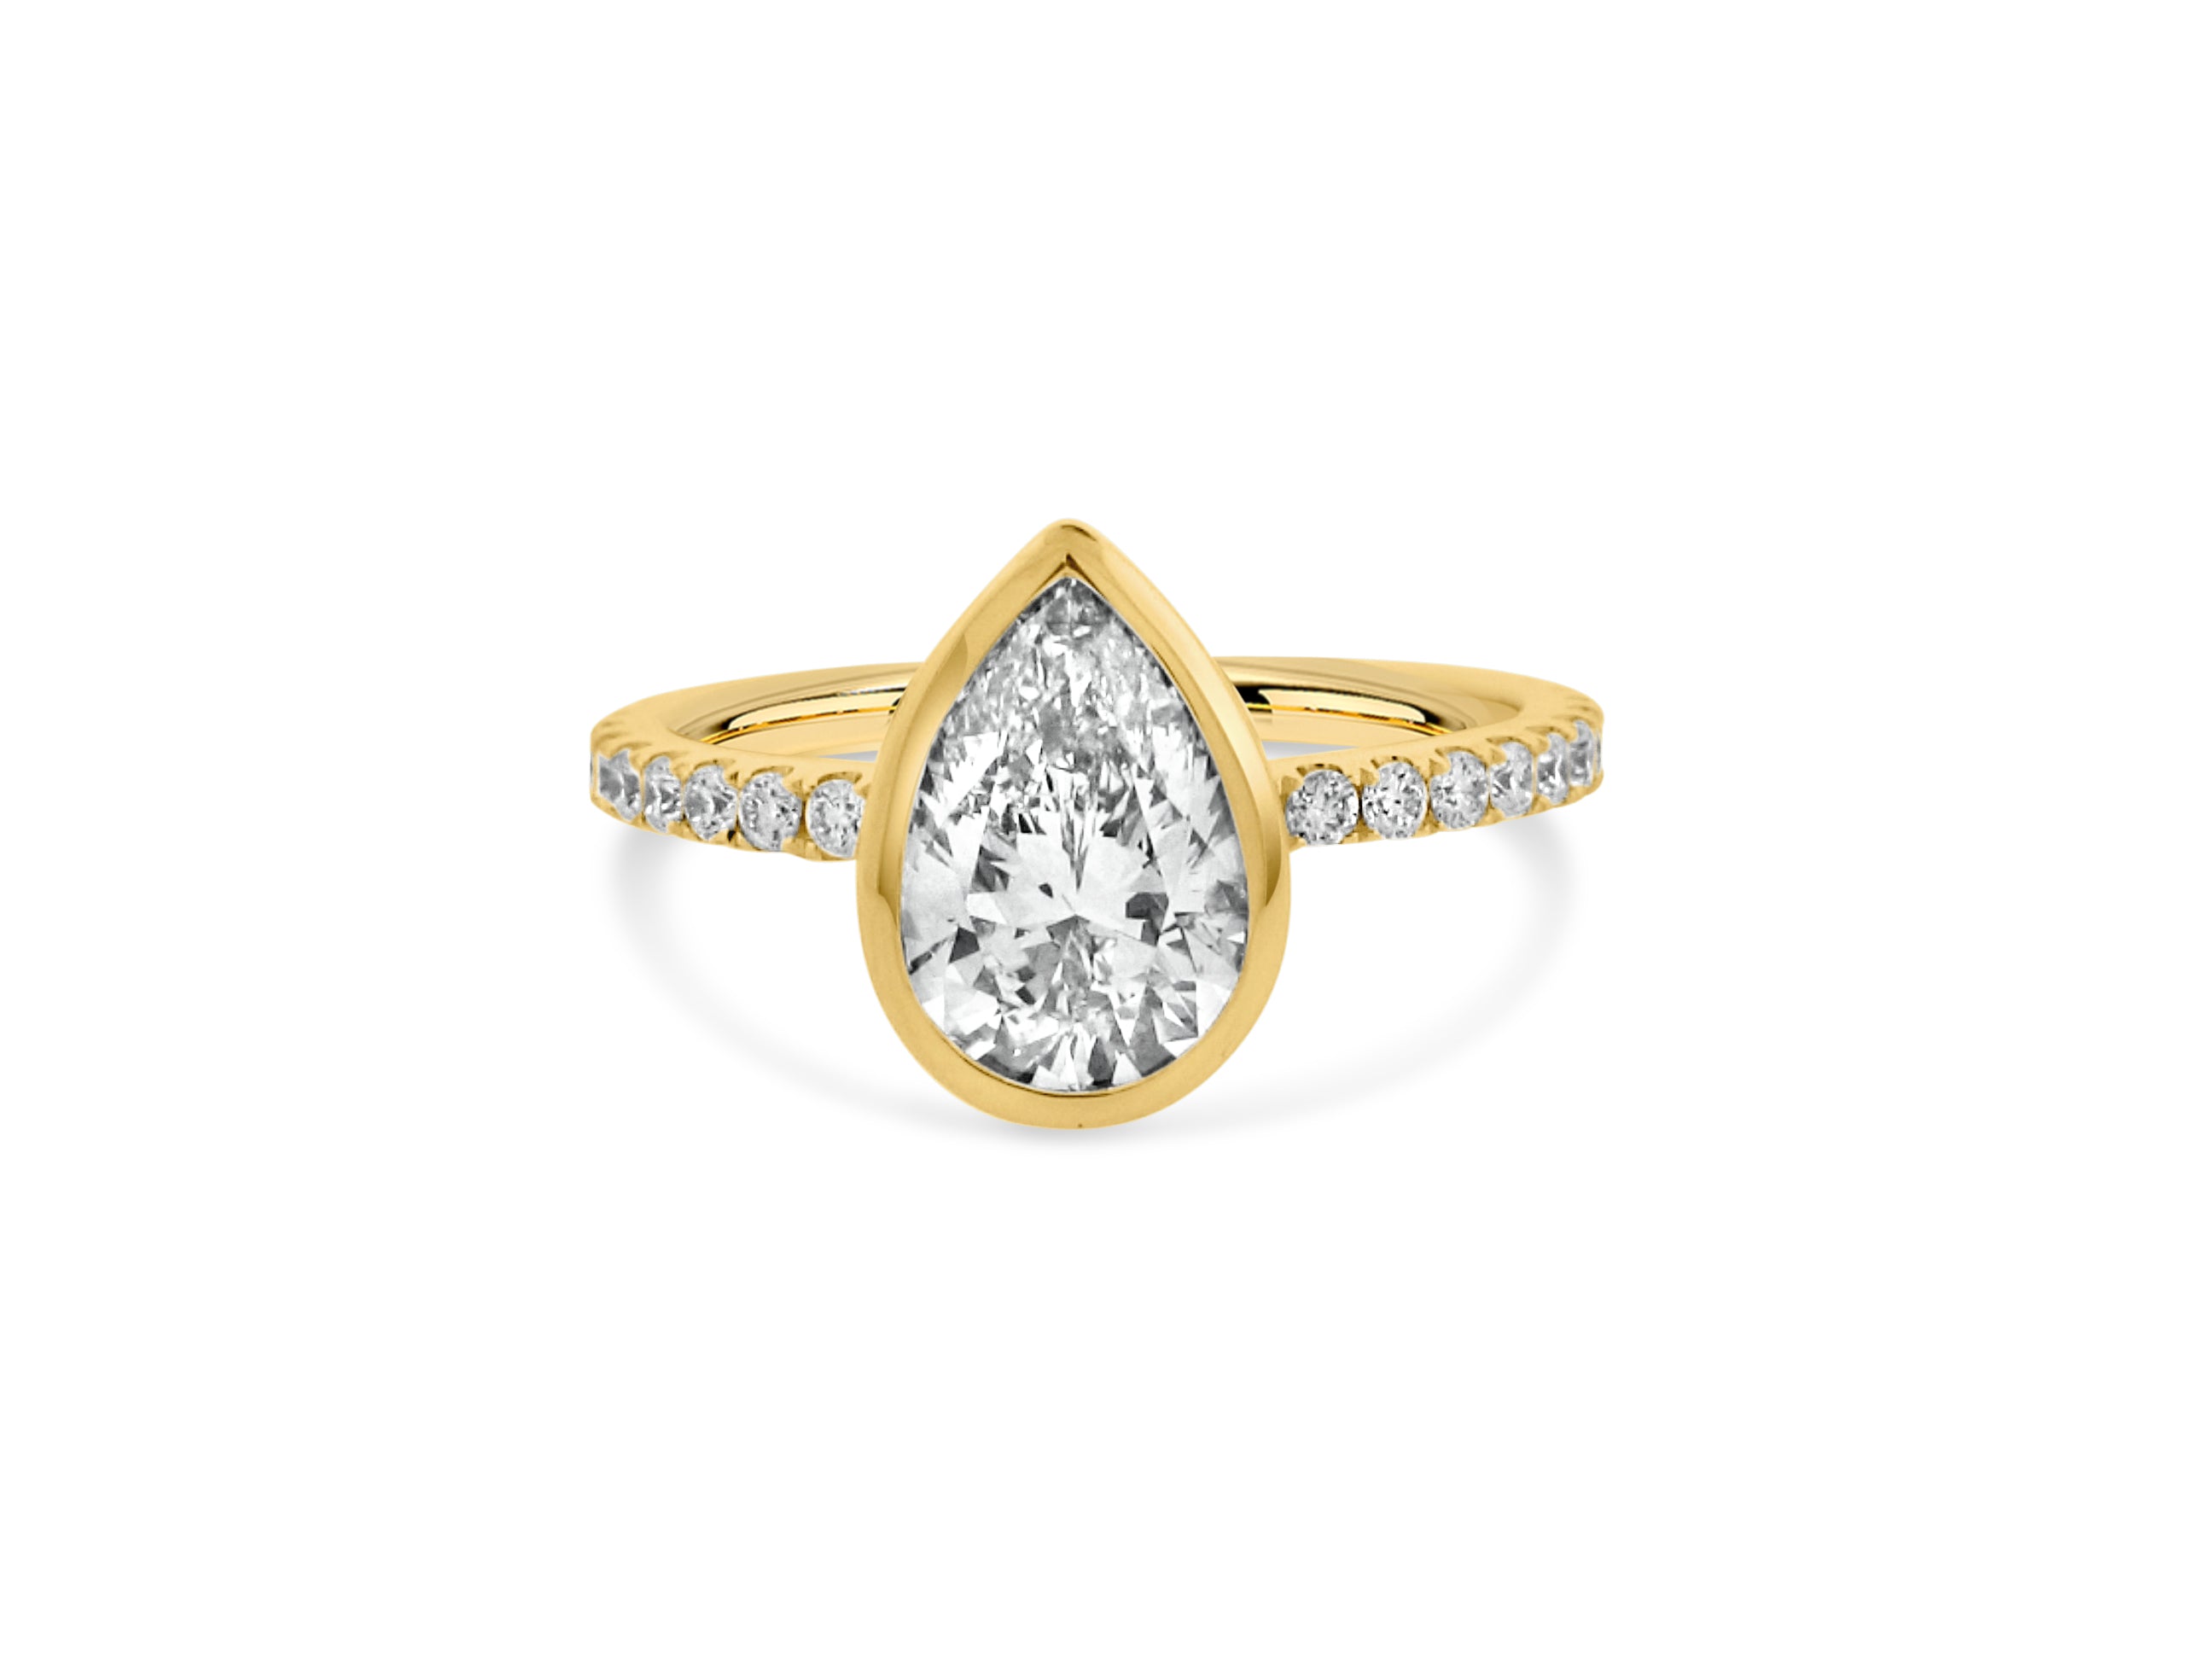 PRIVE' 18K YELLOW GOLD 1.70CT SI1 CLARITY AND F COLOR PEAR SHAPED SWAROVSKI LAB GROWN DIAMOND WITH .28CT NATURAL VS/SI-G ACCENT NATURAL DIAMONDS.